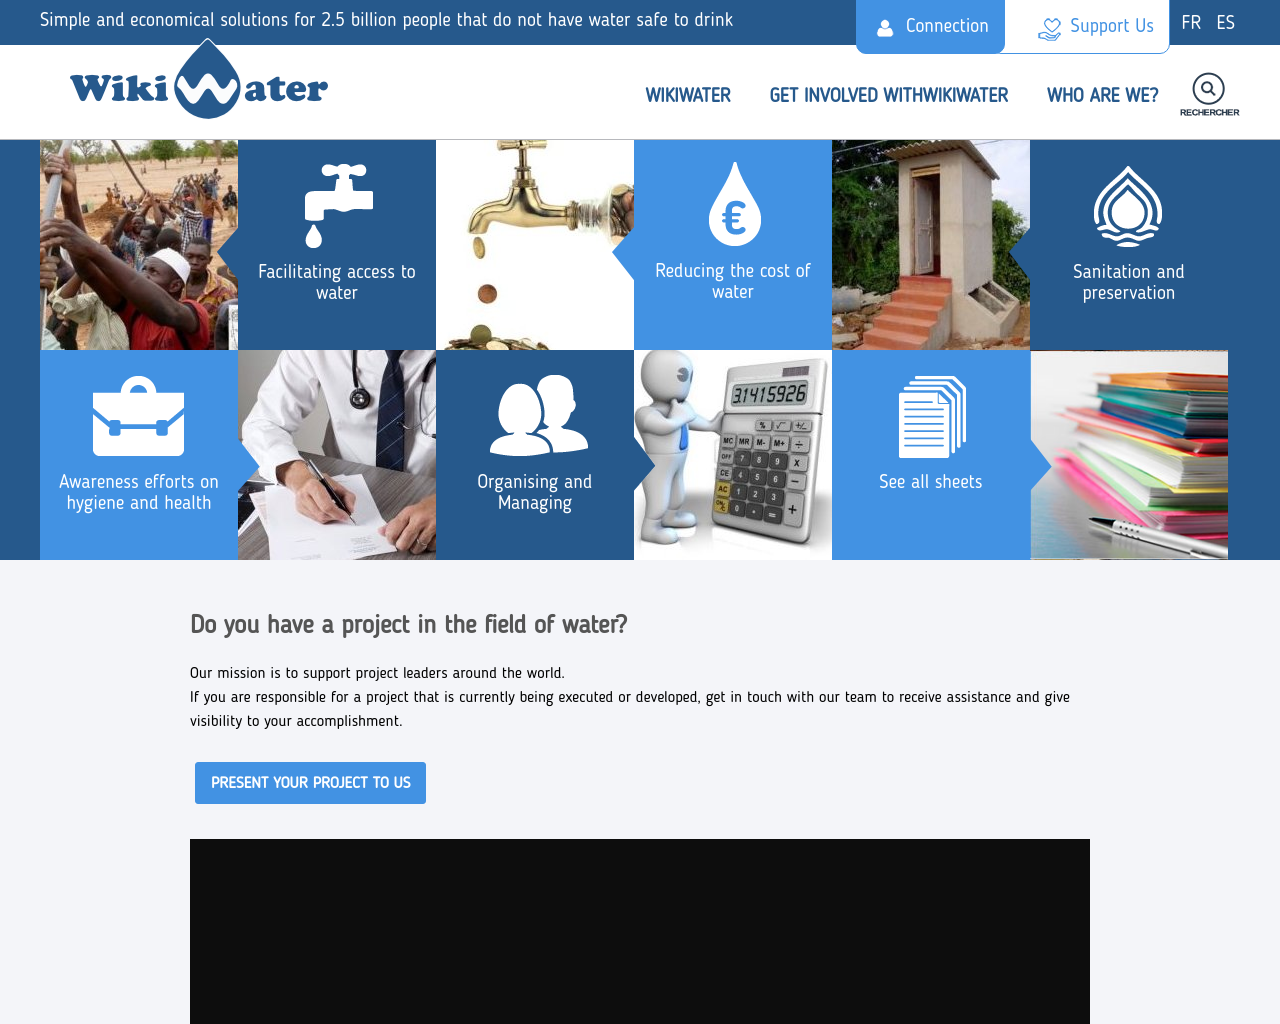 wikiwater.fr